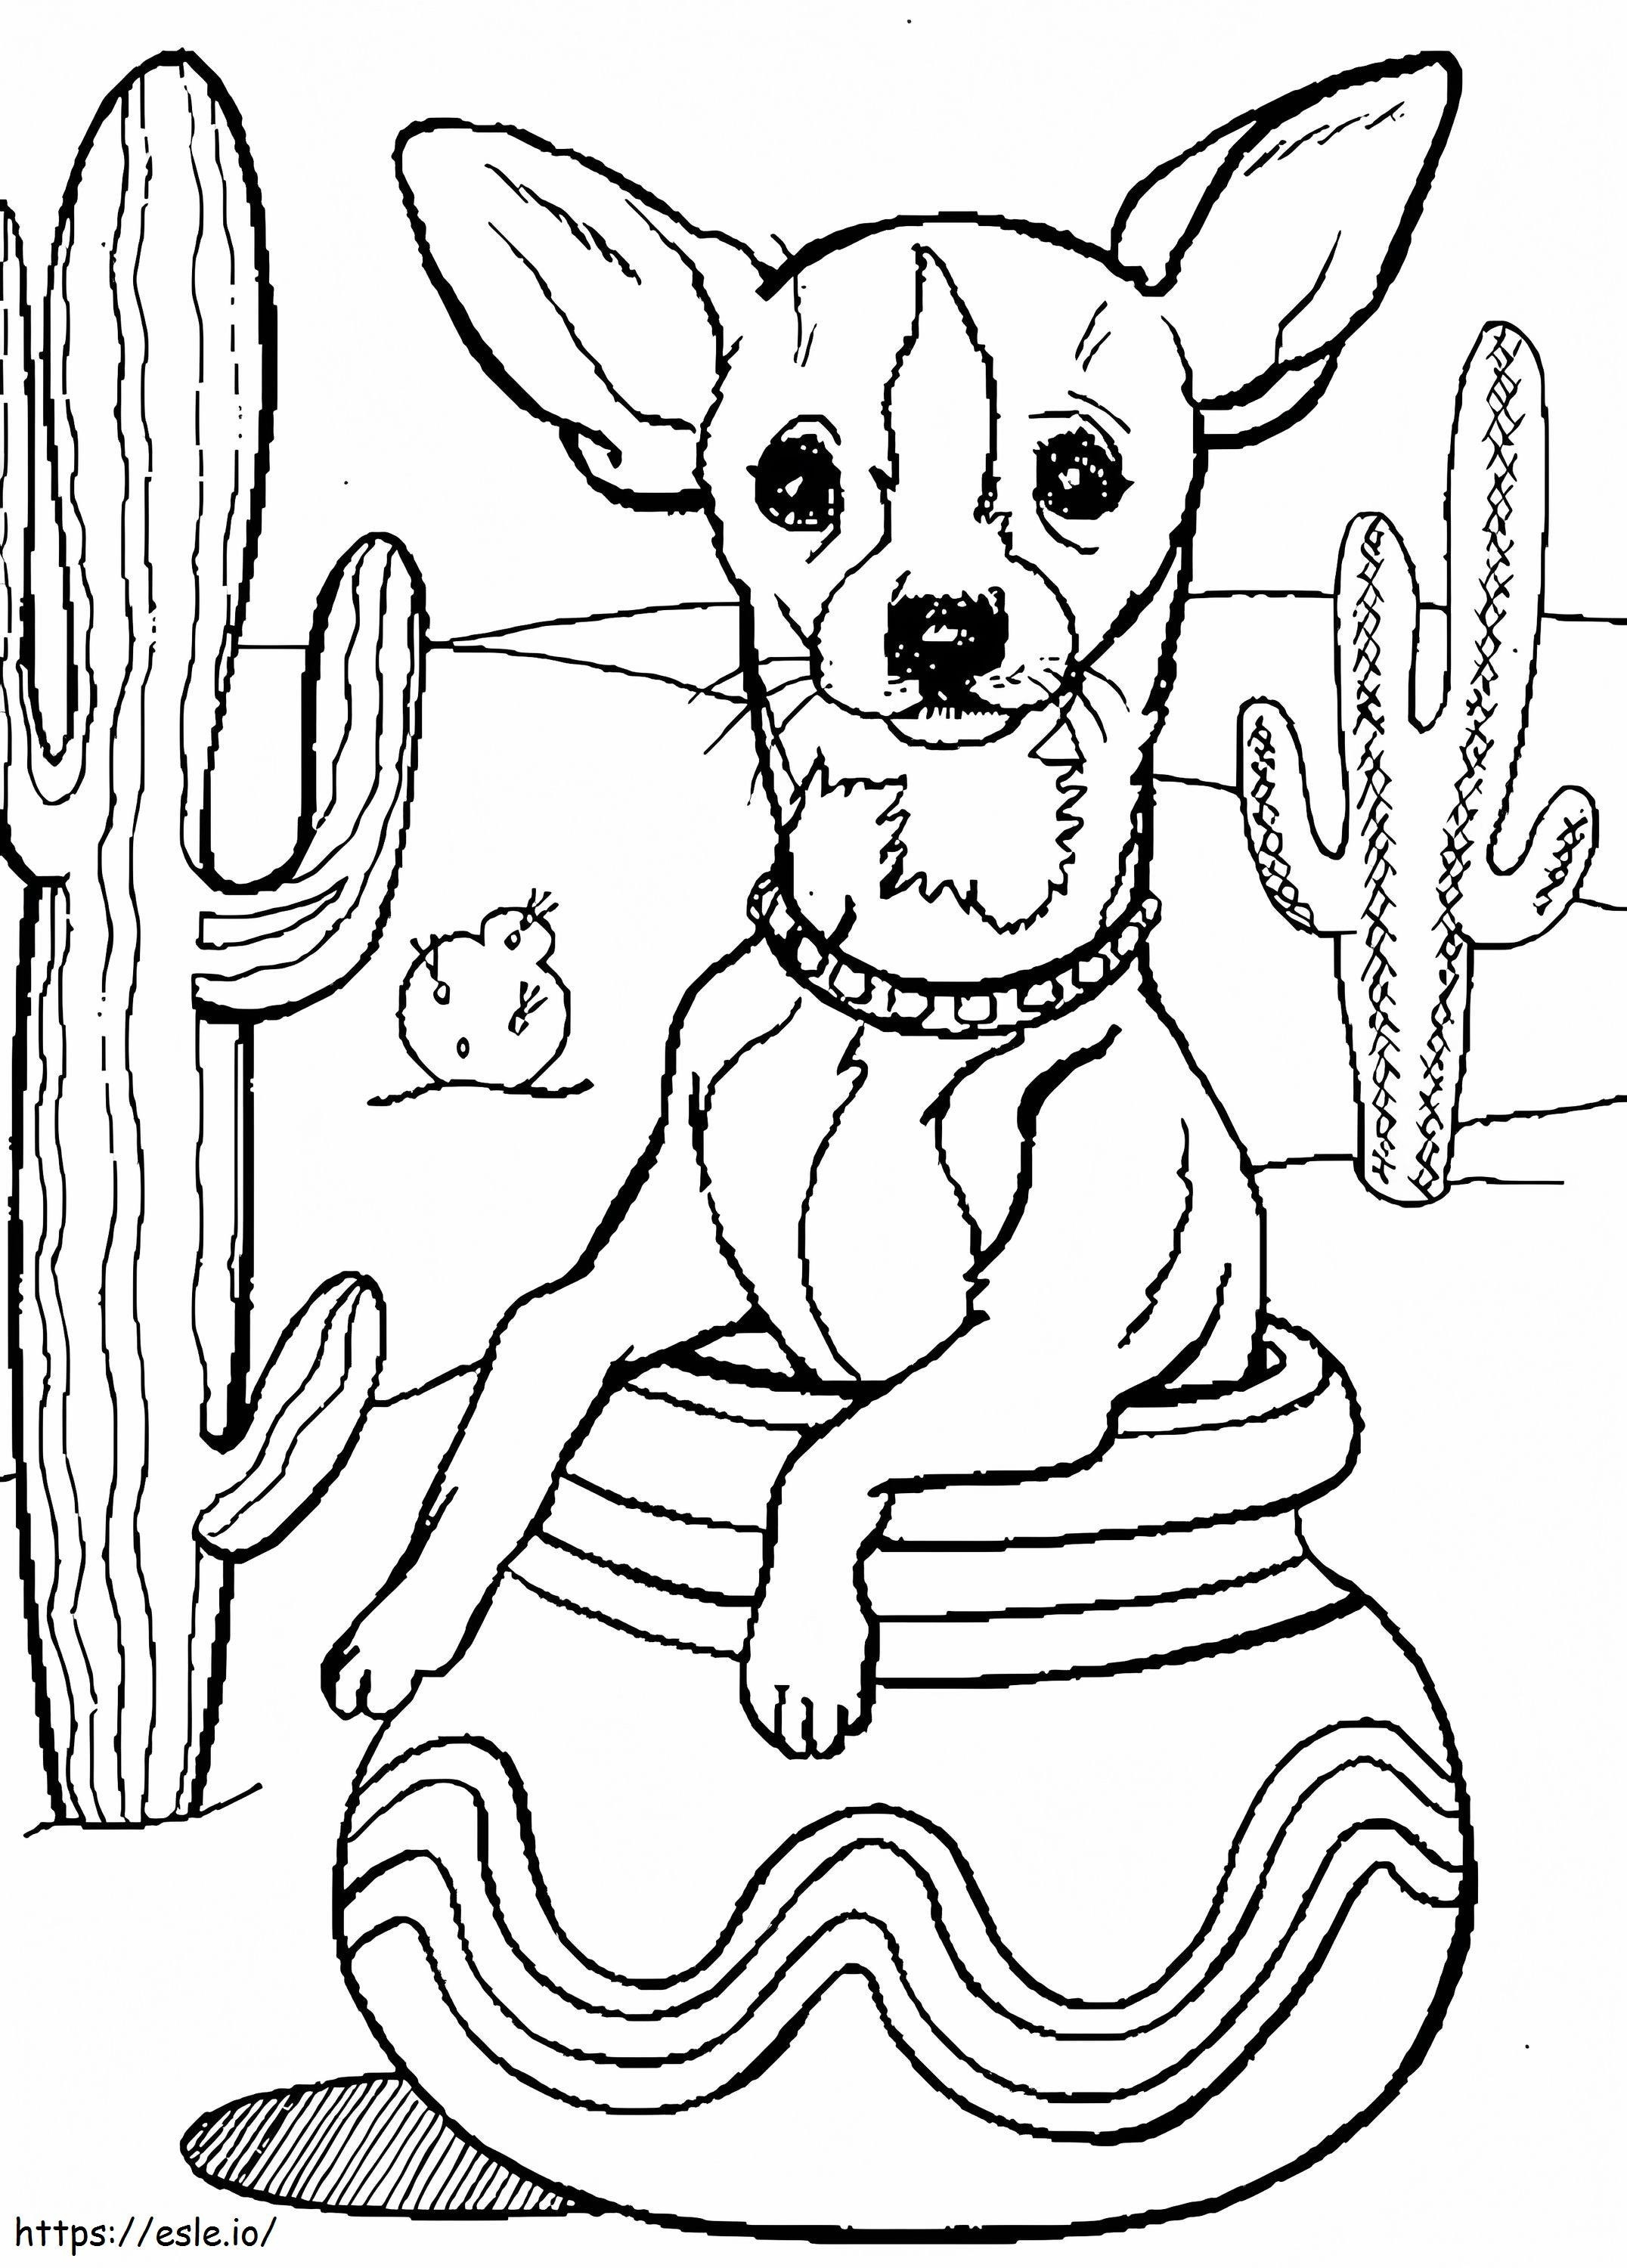 Chihuahua In Desert coloring page